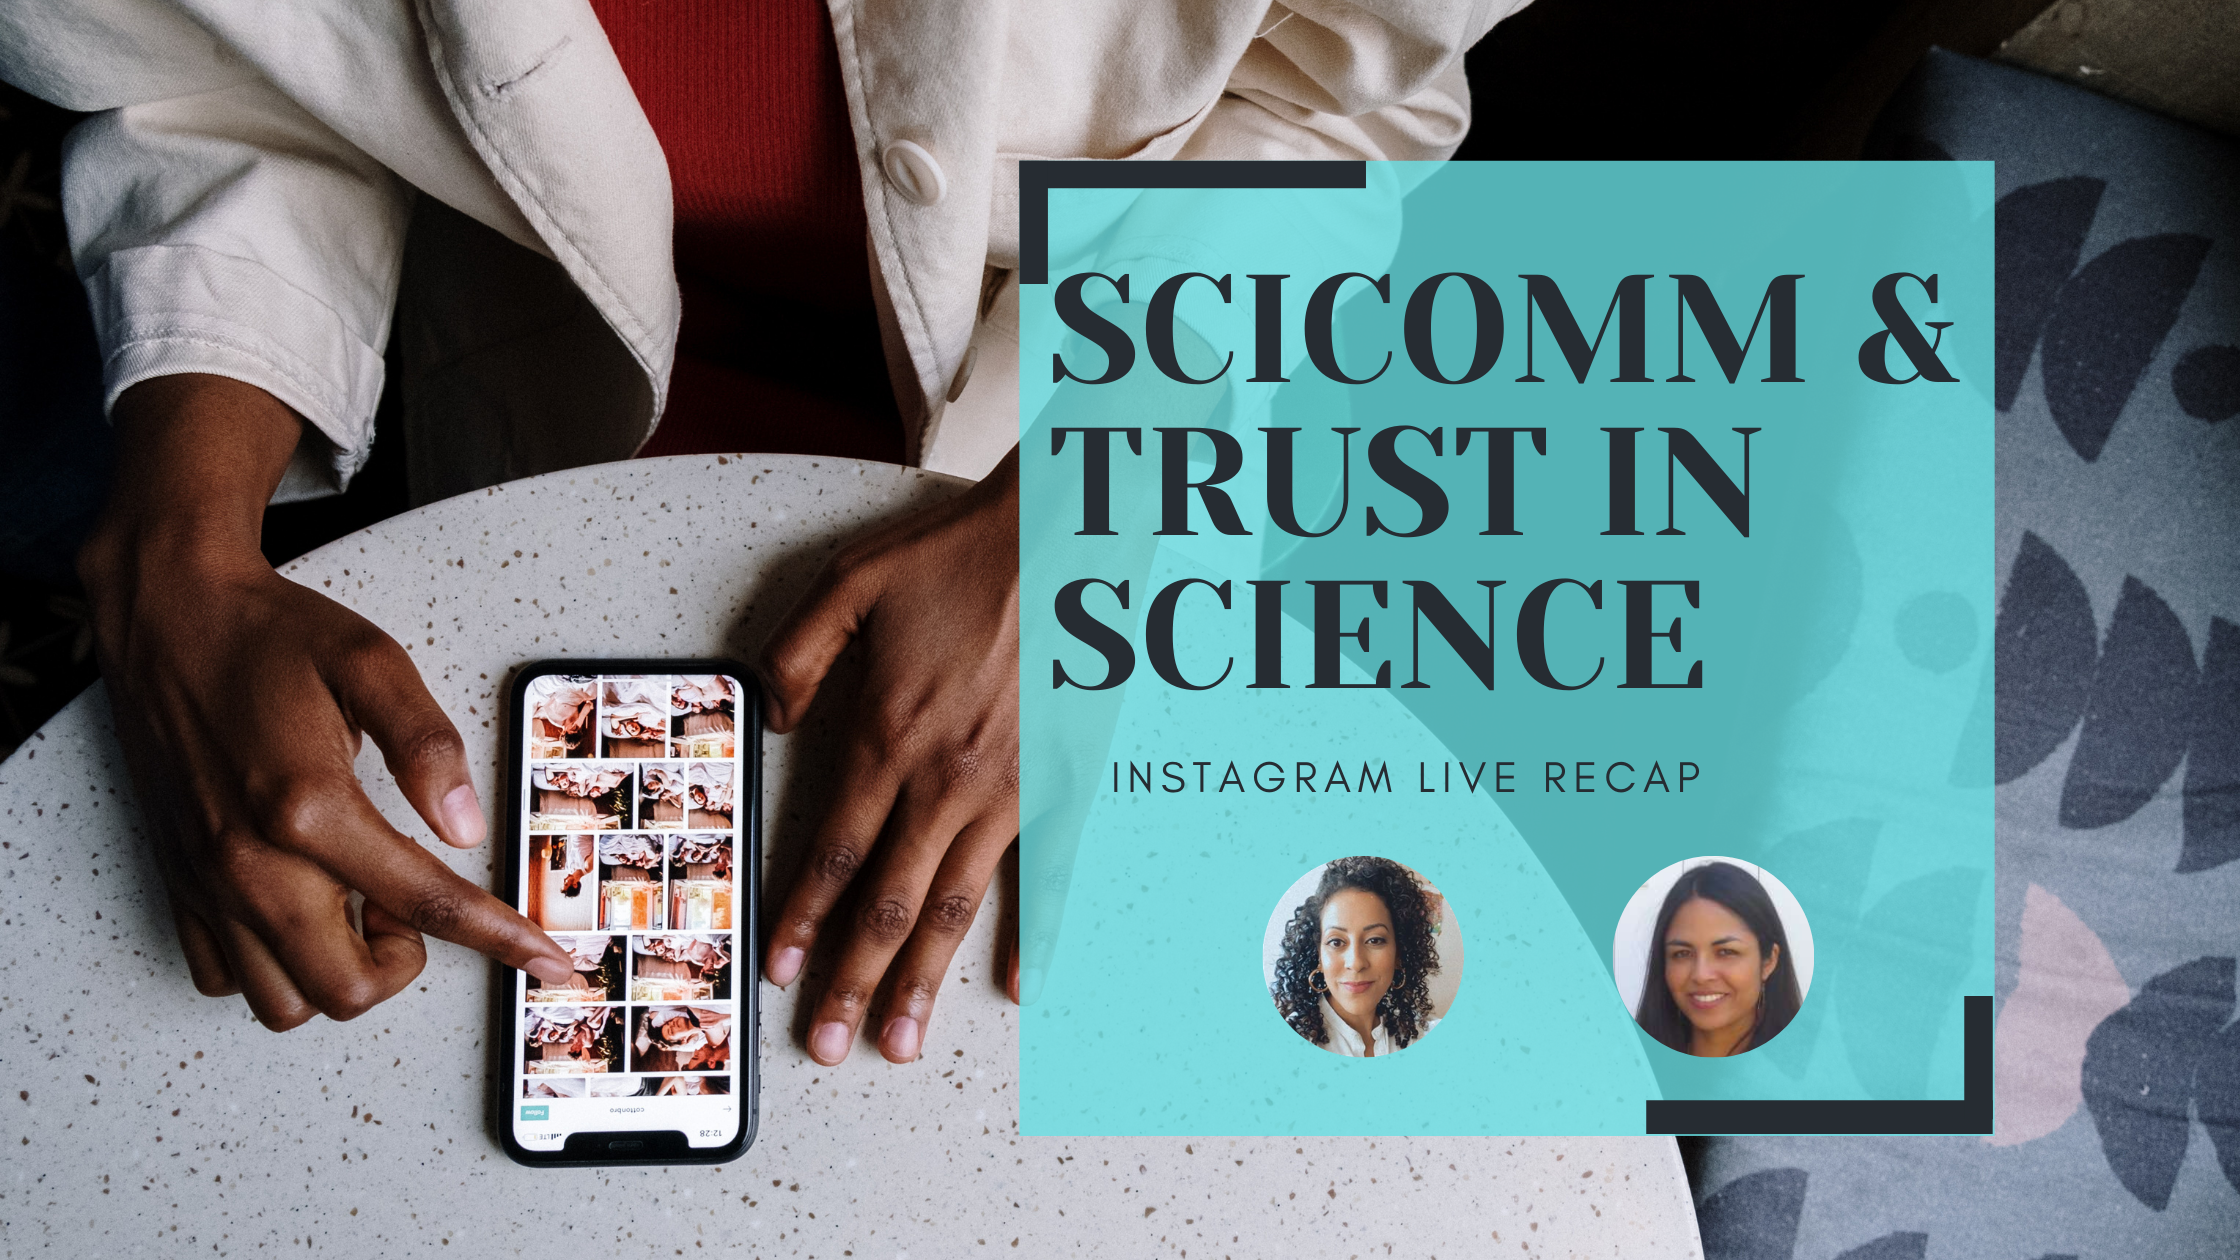 Picture of person scrolling Instagram with words SciComm & Trust in Science-Instagram Live Recap with Pictures of Jessica Malaty Rivera and Luisa Torres.